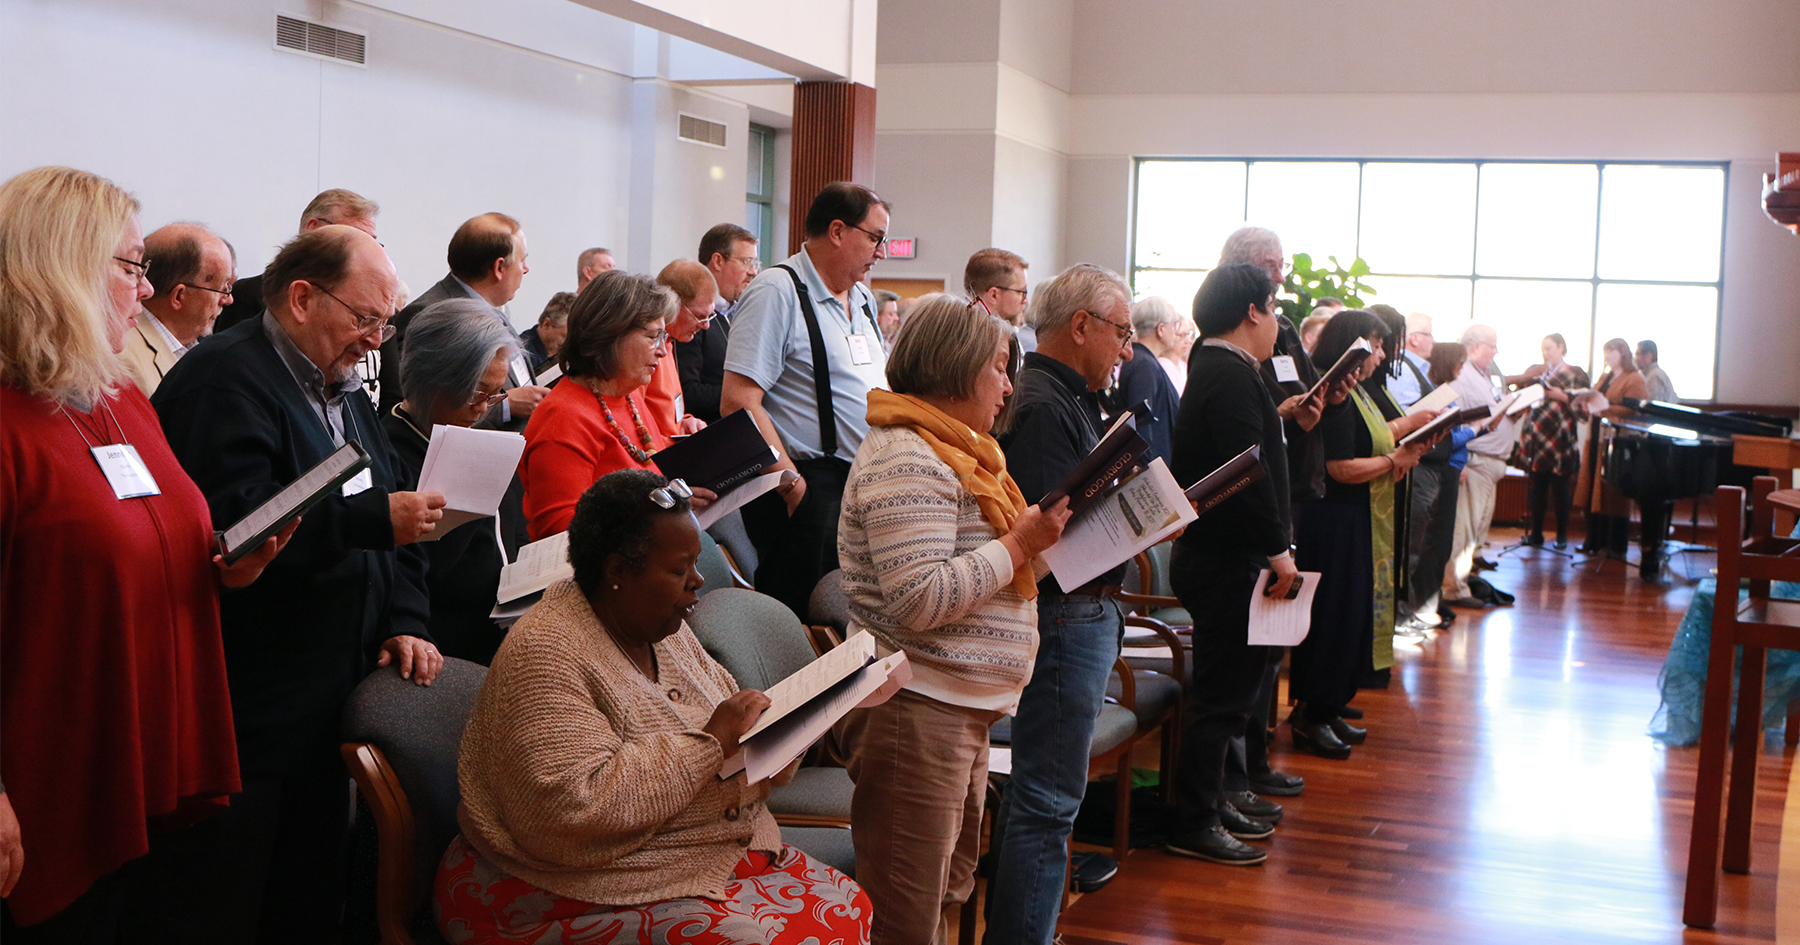 Moderators from across the PC(USA) gather for worship on the opening day of the Moderators’ Conference at the Presbyterian Center in Louisville. Photo by Rick Jones.